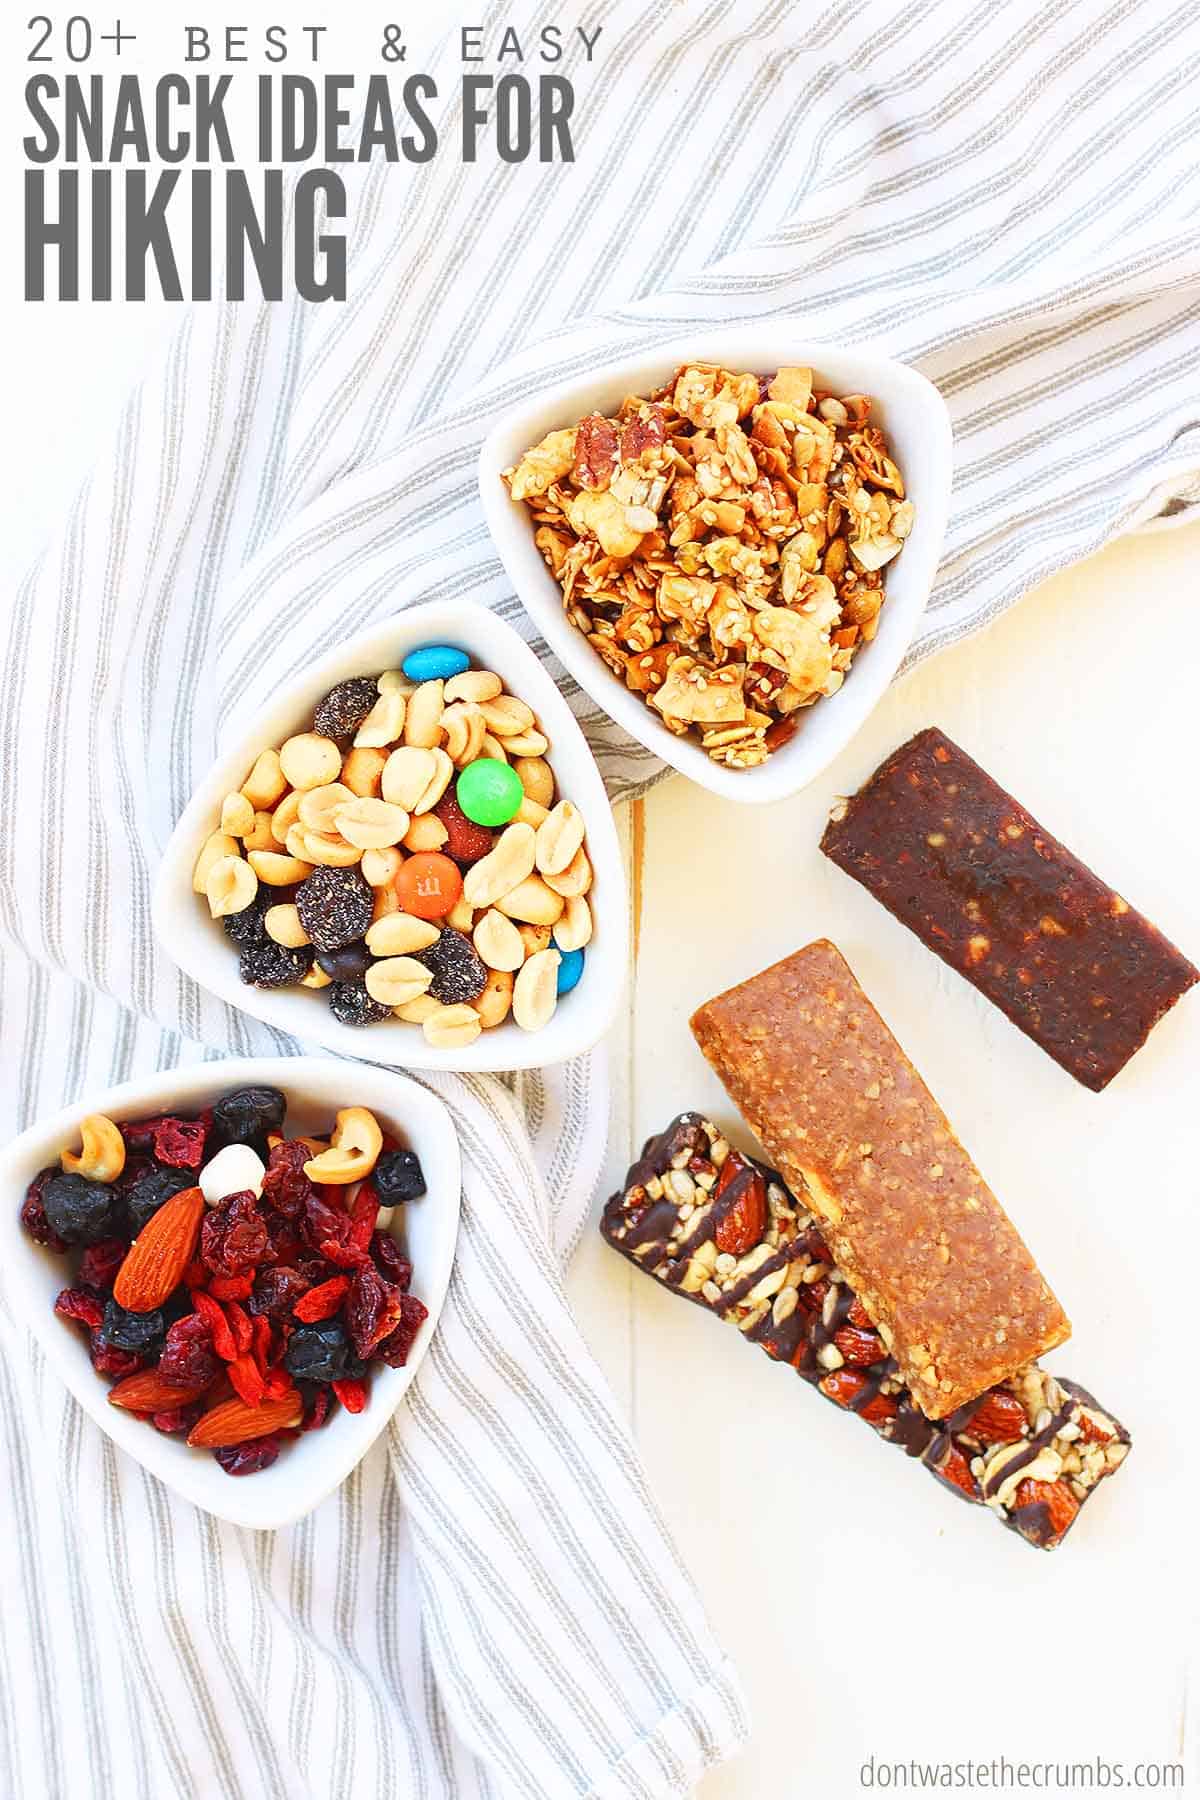 Here are the snacks best for hiking. Granola bars, trail mix, protein bars.